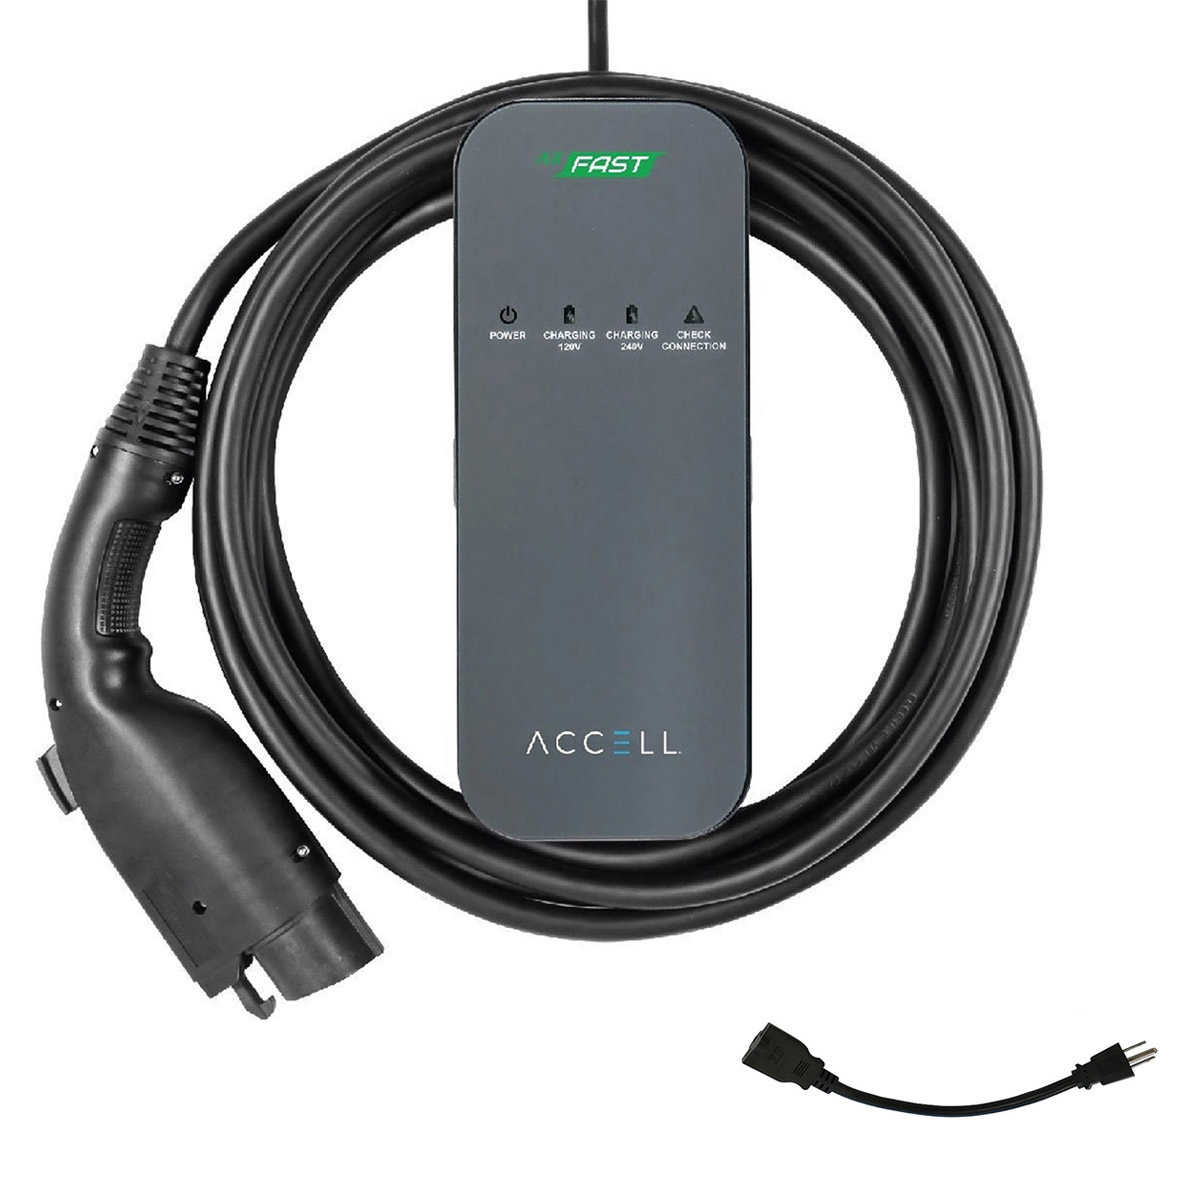 AxFAST Level 2 Portable Electric Vehicle Charger